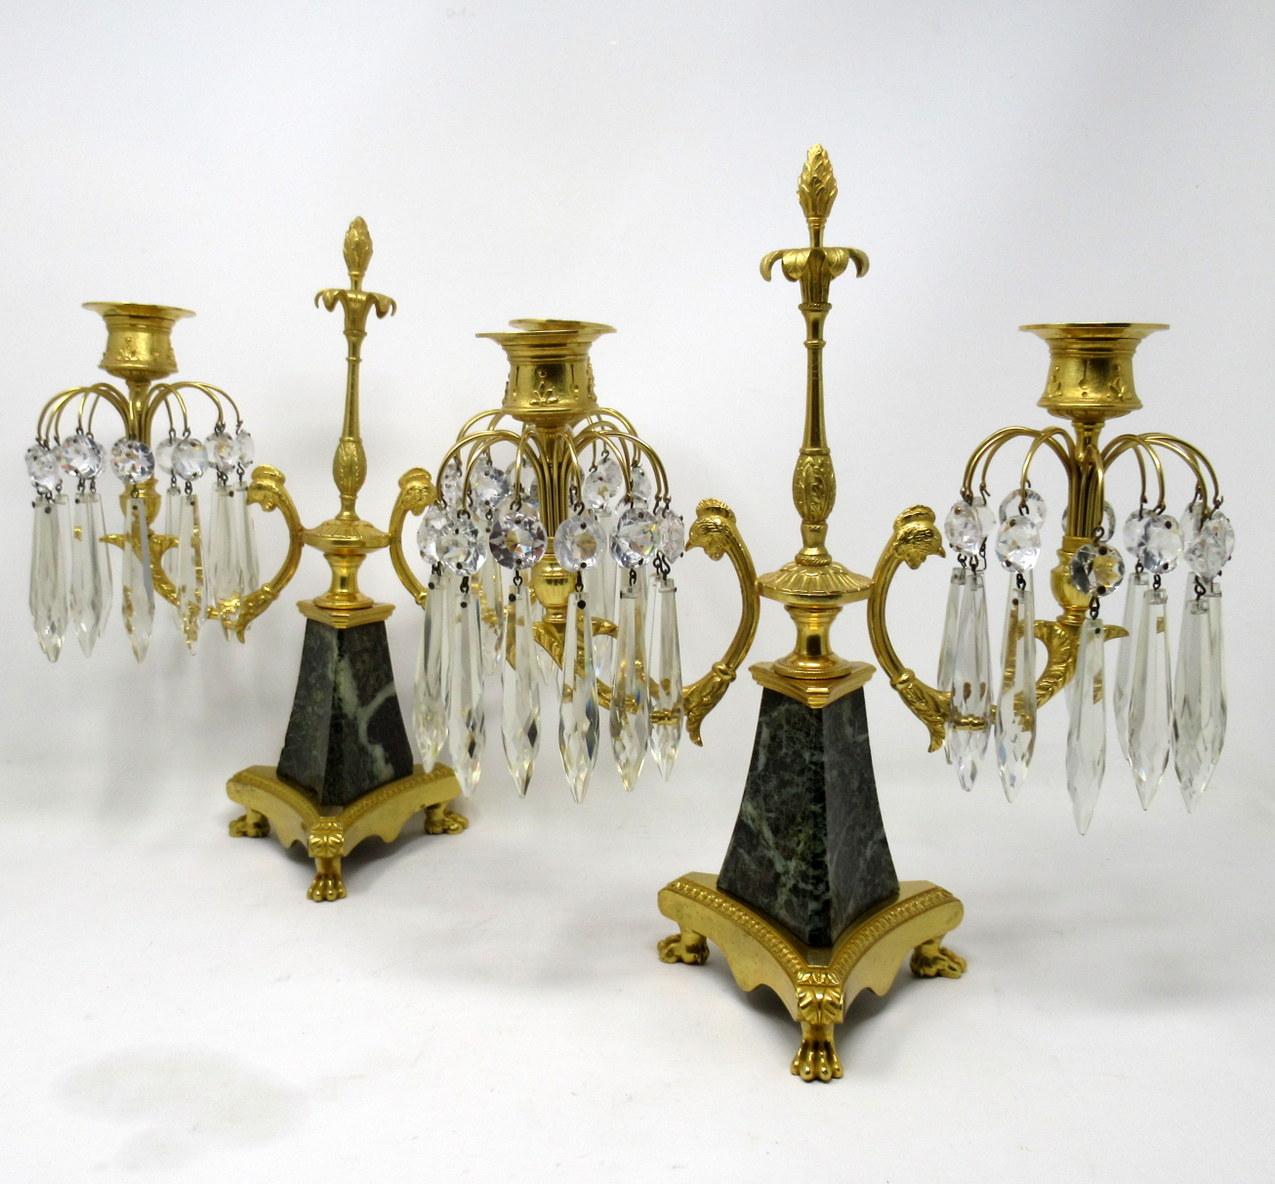 Stunning pair of French Louis XV style statutory marble and Ormolu twin light candelabra, after a model by Pierre Gouthiere (1732-1813), mid-19th century.

Each with a centered spire topped with a leaf canopy and an Acorn finial, issuing two